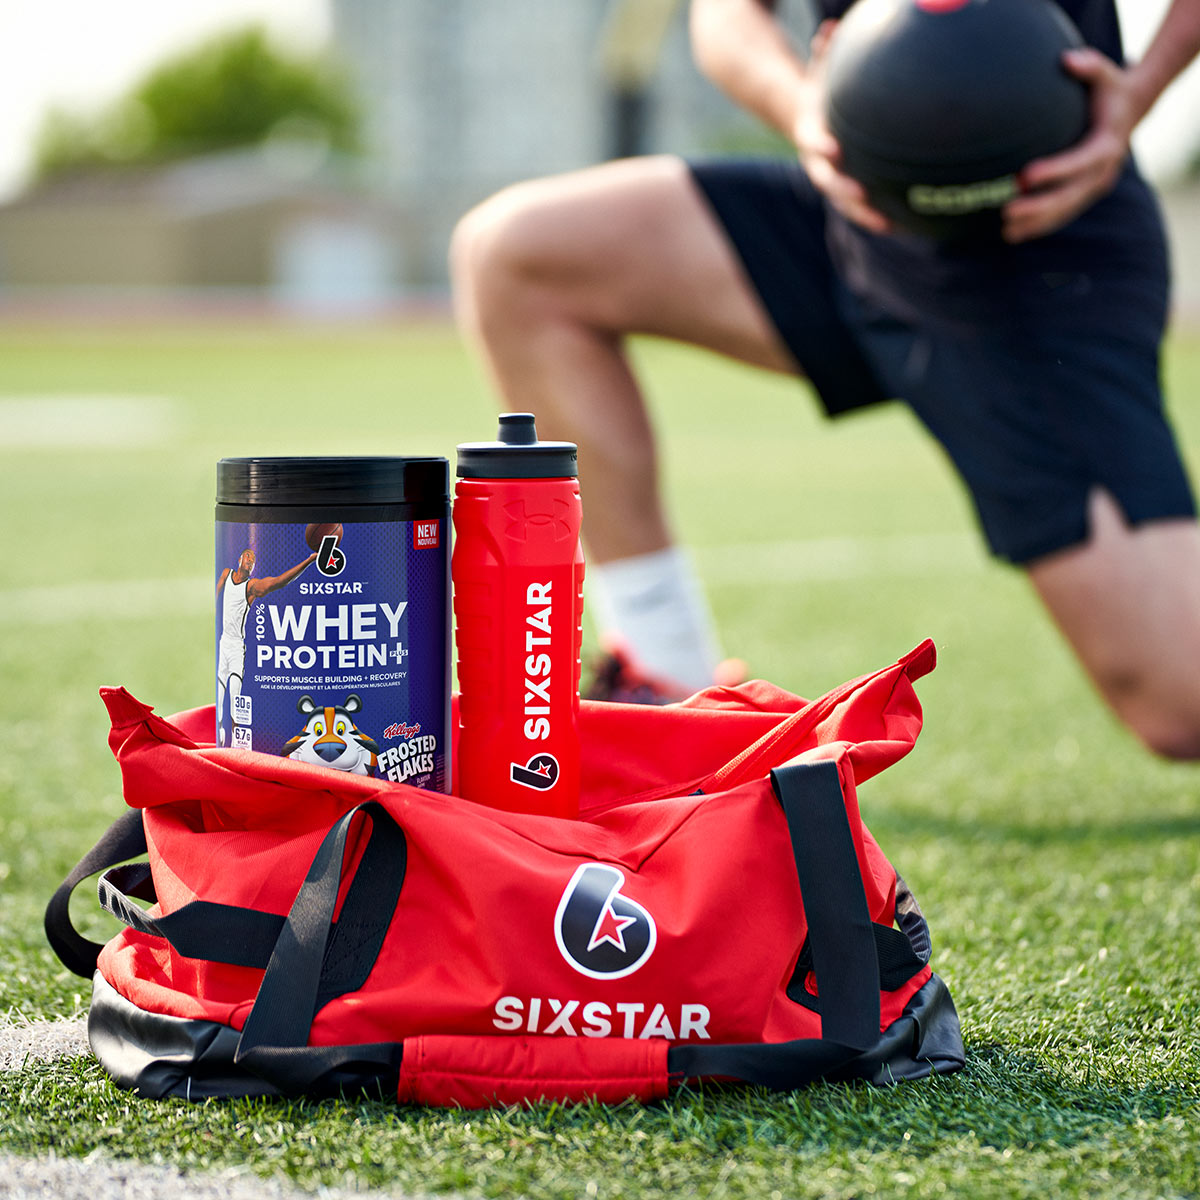 Training outdoors with 100% Whey Protein Plus Kellogg's Frosted Flakes®